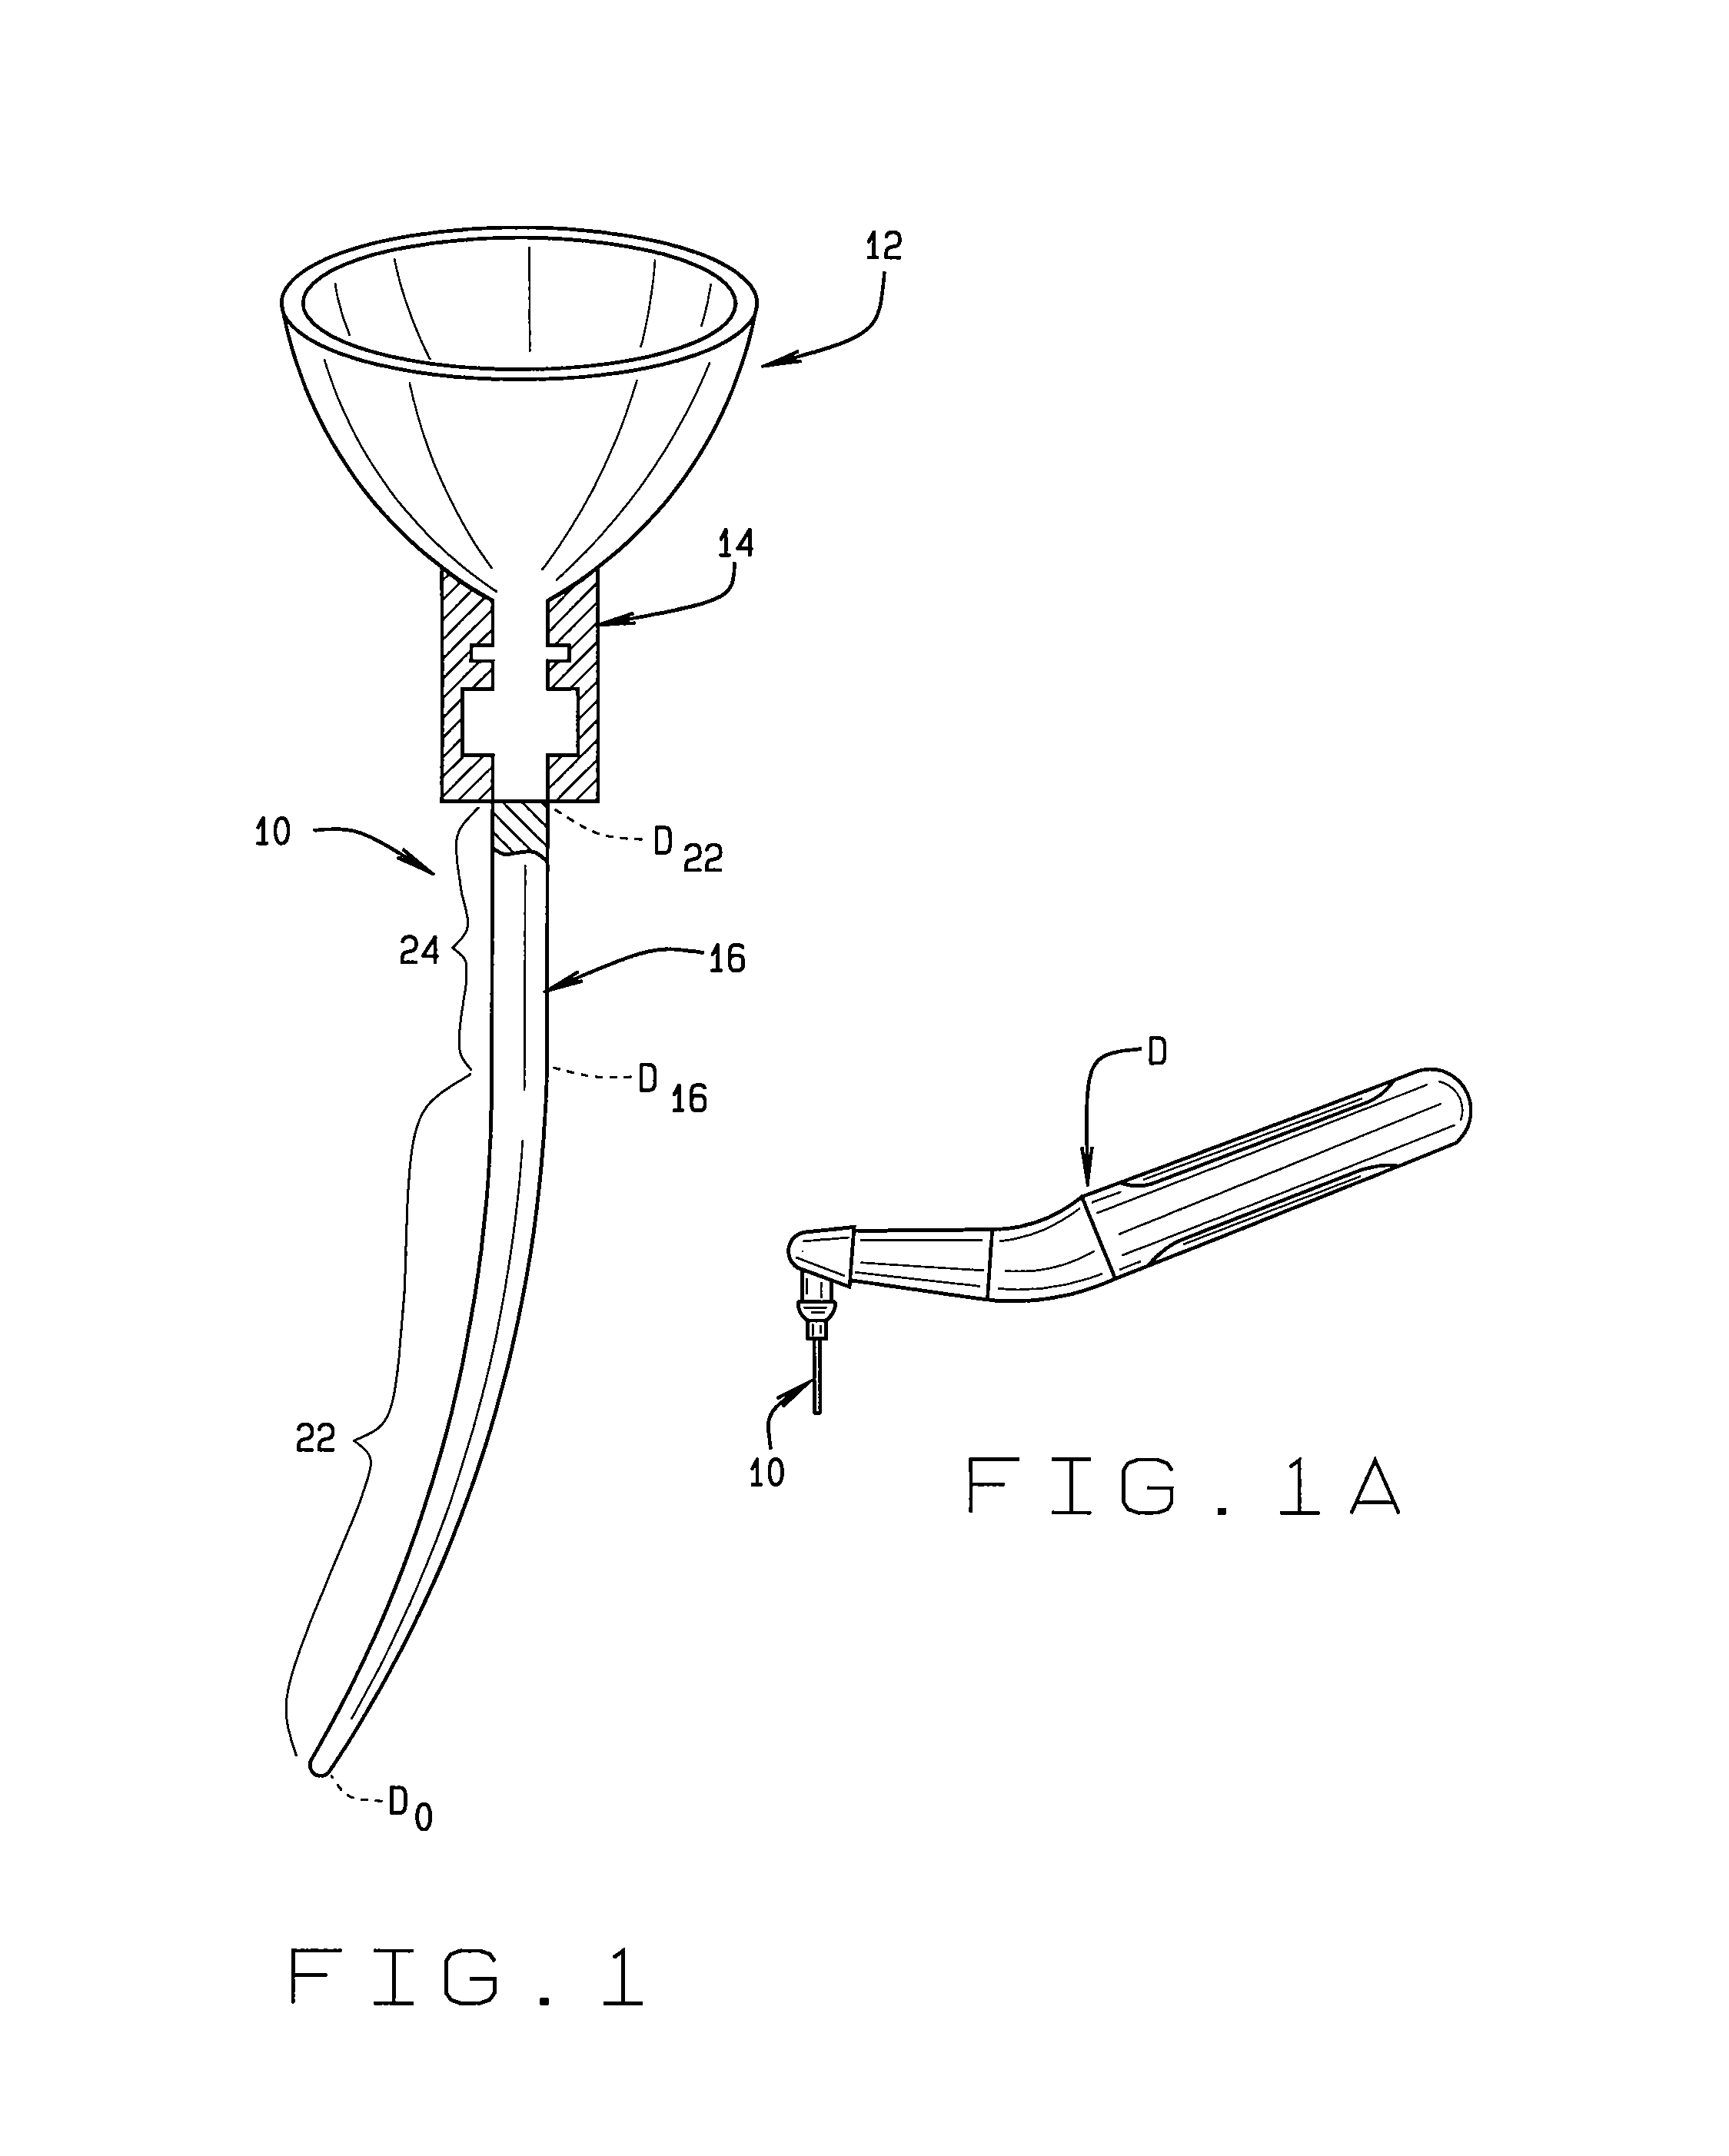 Method for cleaning a root canal system